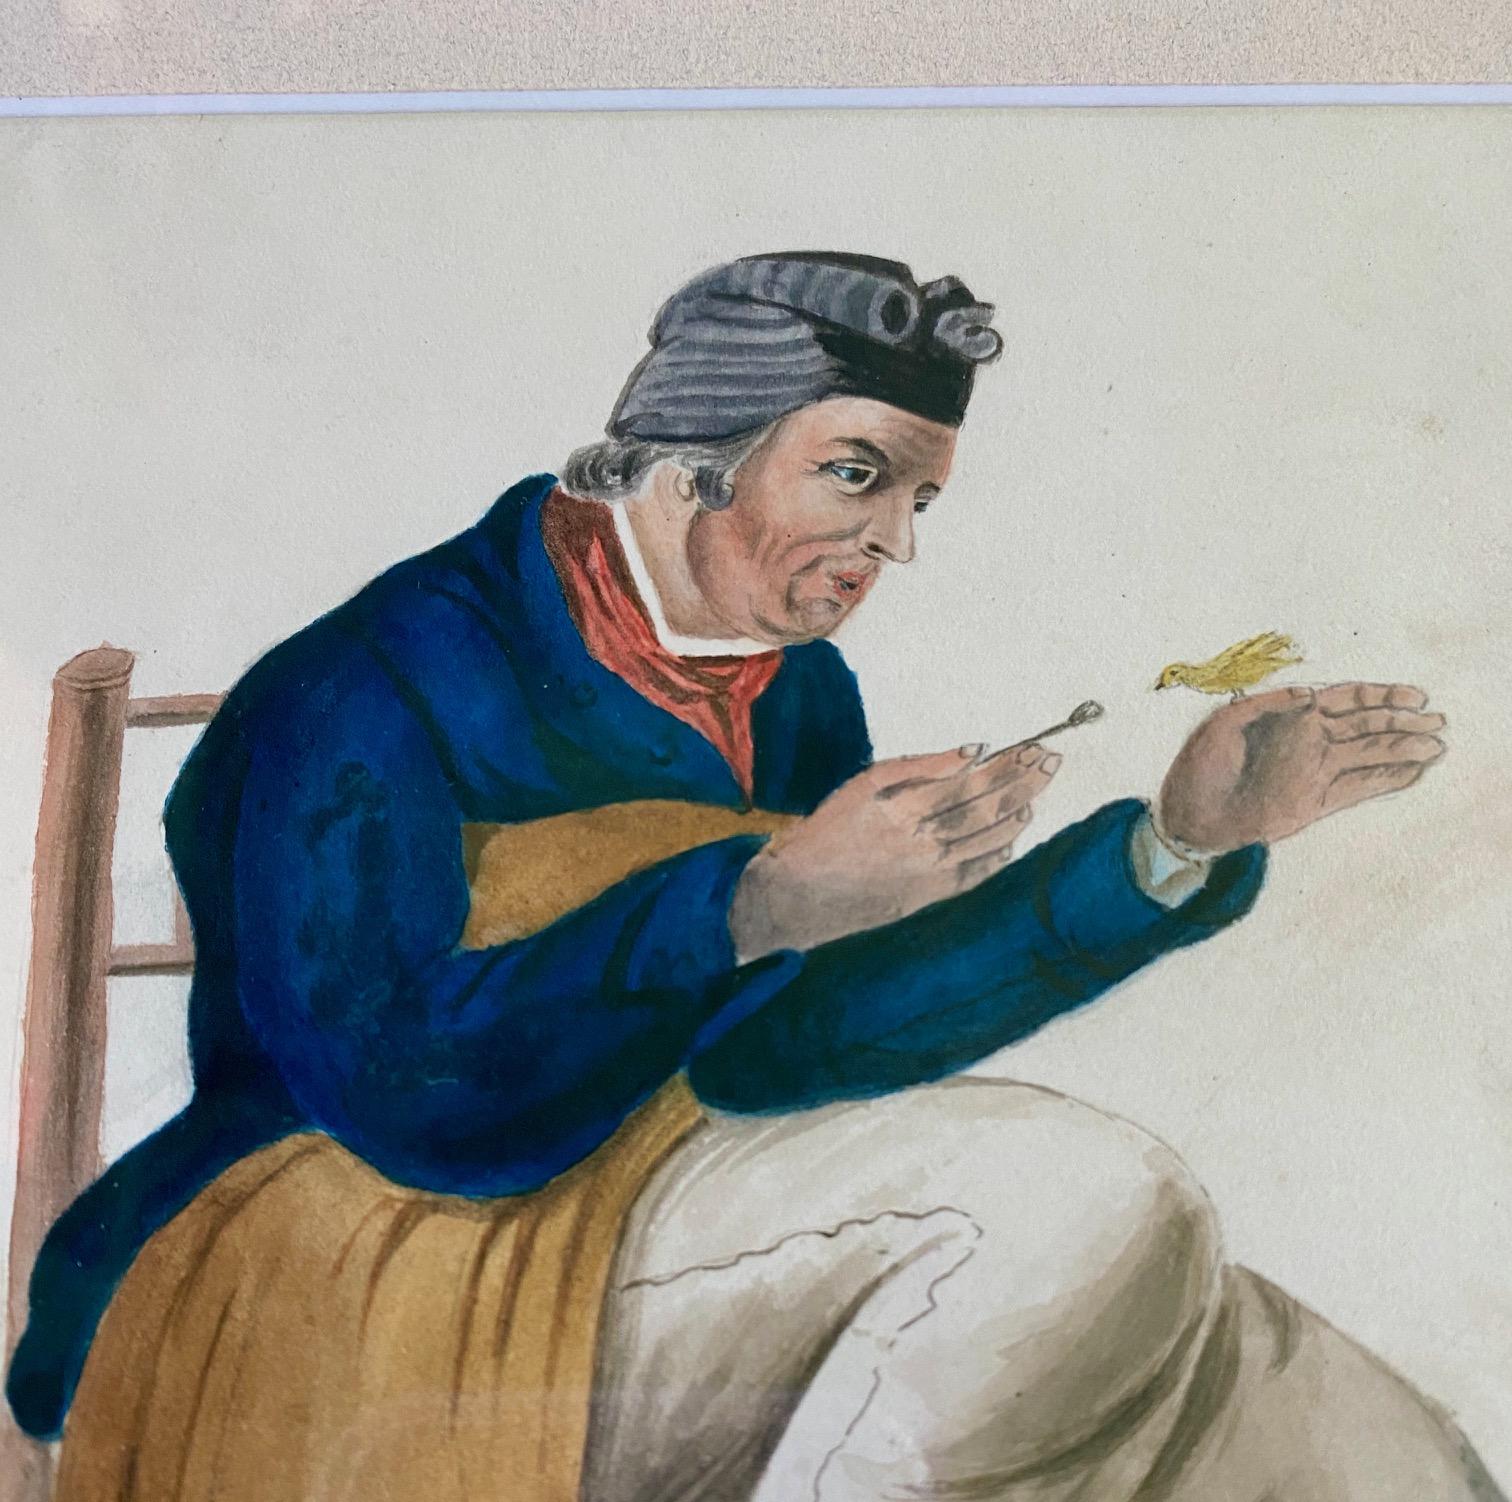 Antique watercolor view of a sailor with pet bird, circa 1800, a lovely detailed painting of a sailor seated in rough chair, tenderly spoon feeding a finch perched on his hand, inscribed 